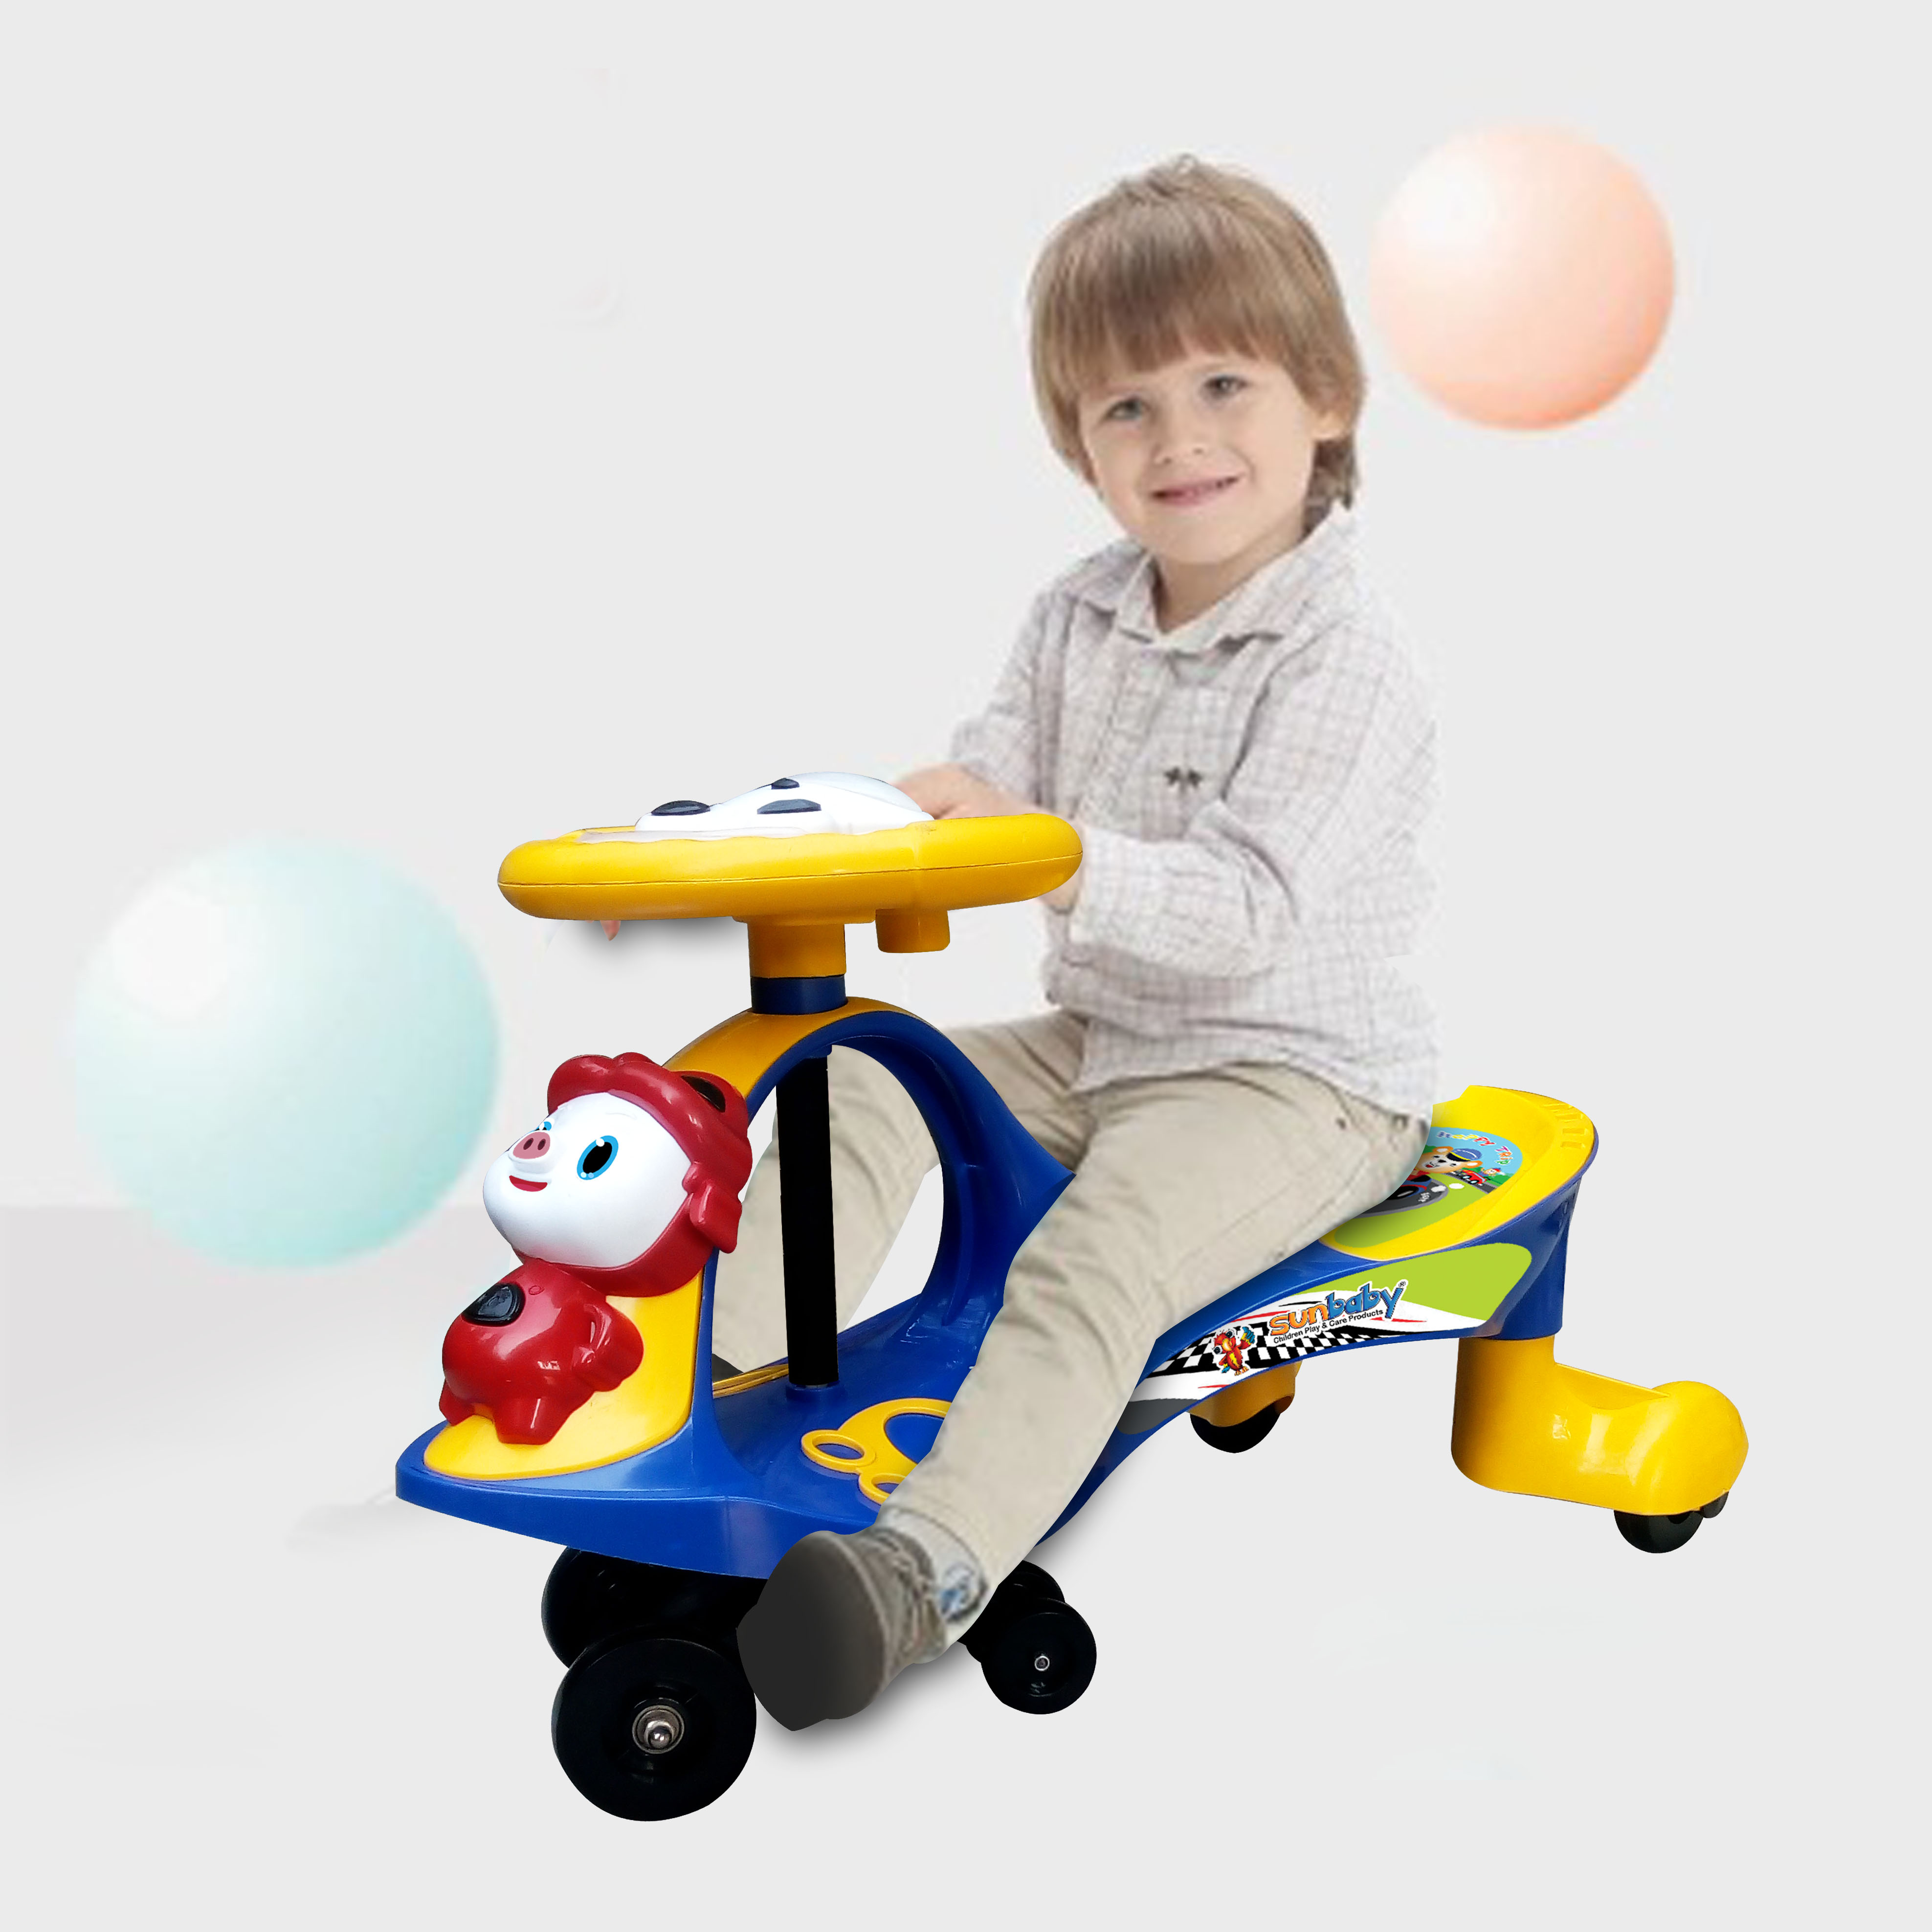 SUNBABY Alpha The Ultimate Radeon Magic Swing Car Ride on Car with